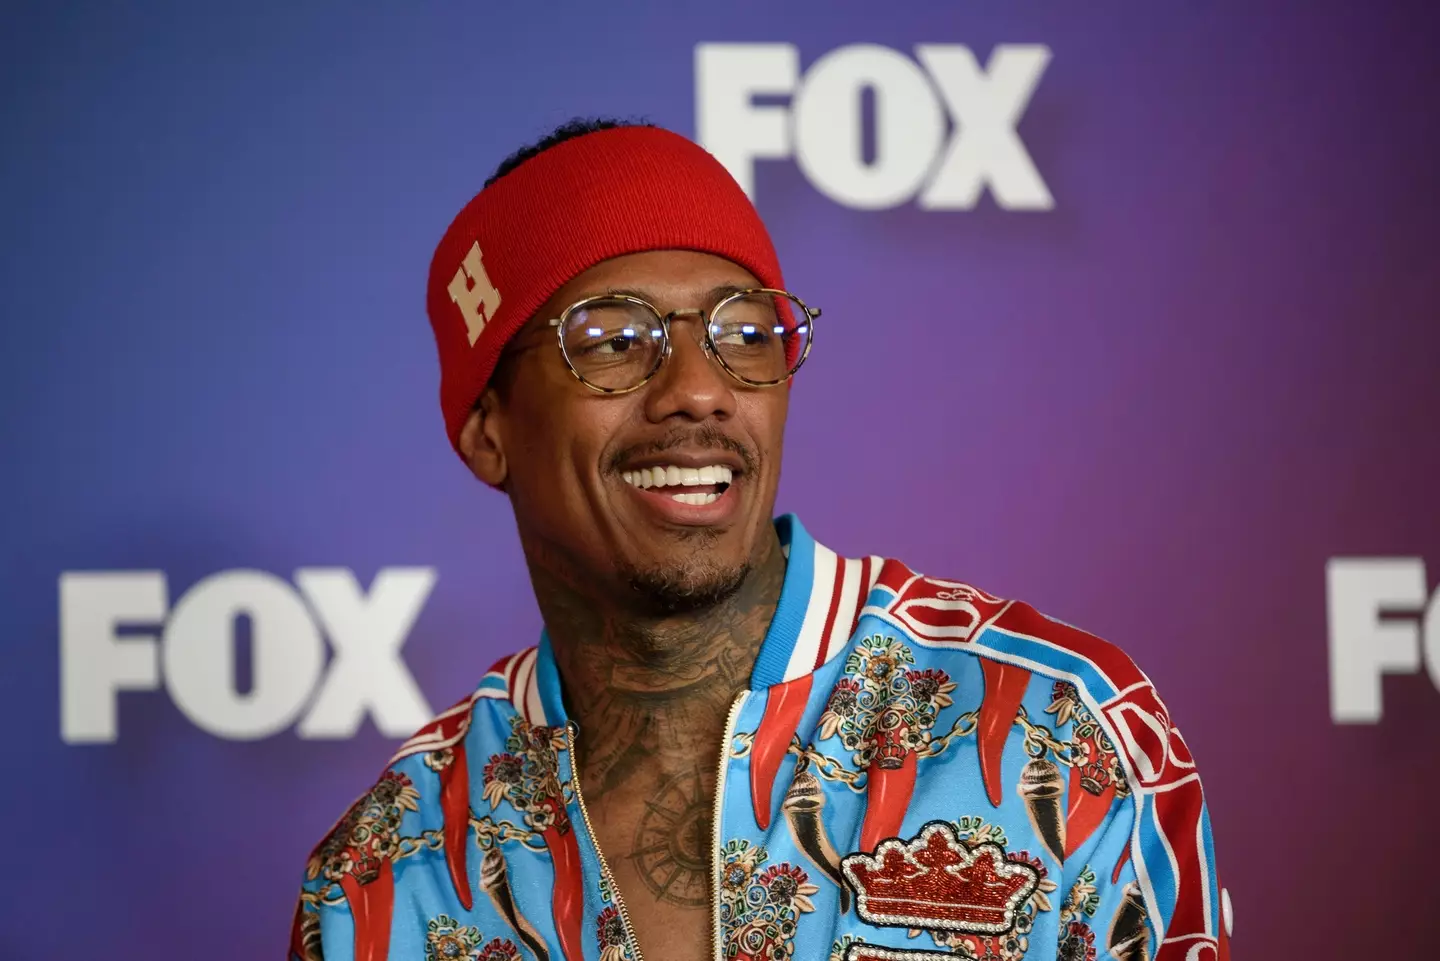 Nick Cannon has had beef with 50 Cent since 2019.